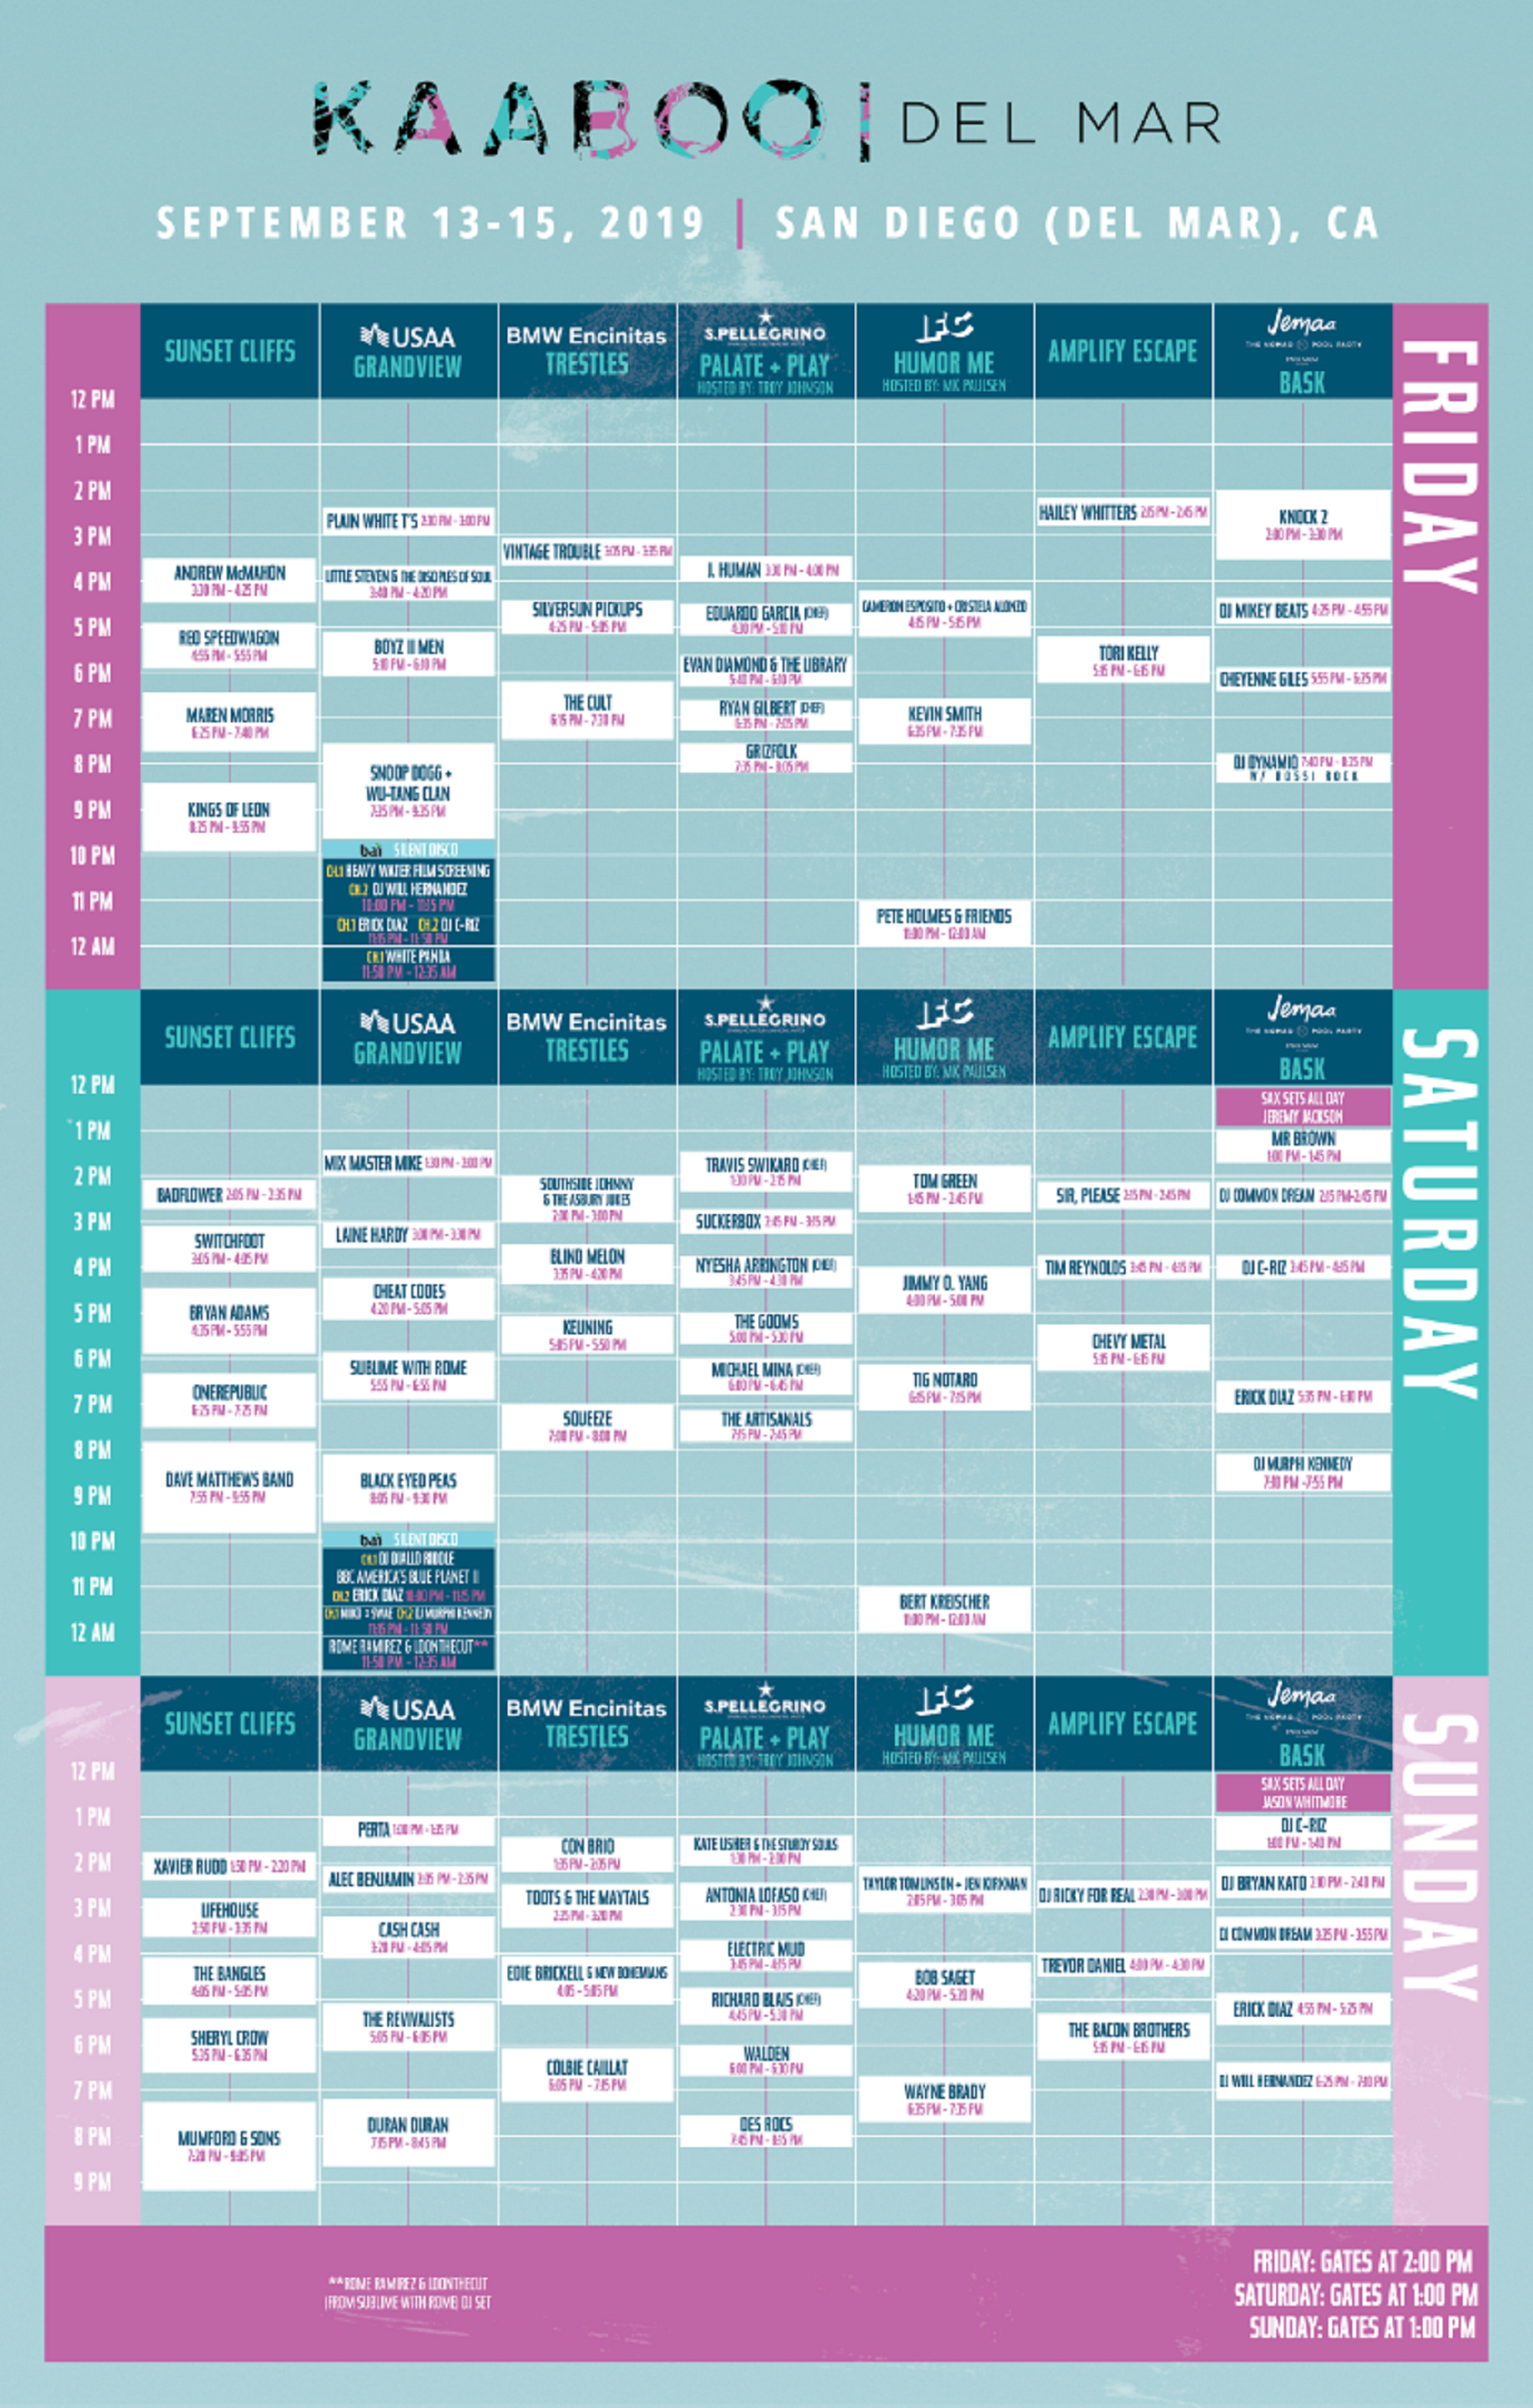 Kaaboo Schedule 2022 Kaaboo Del Mar 2019 Daily Schedule Announced | Grateful Web